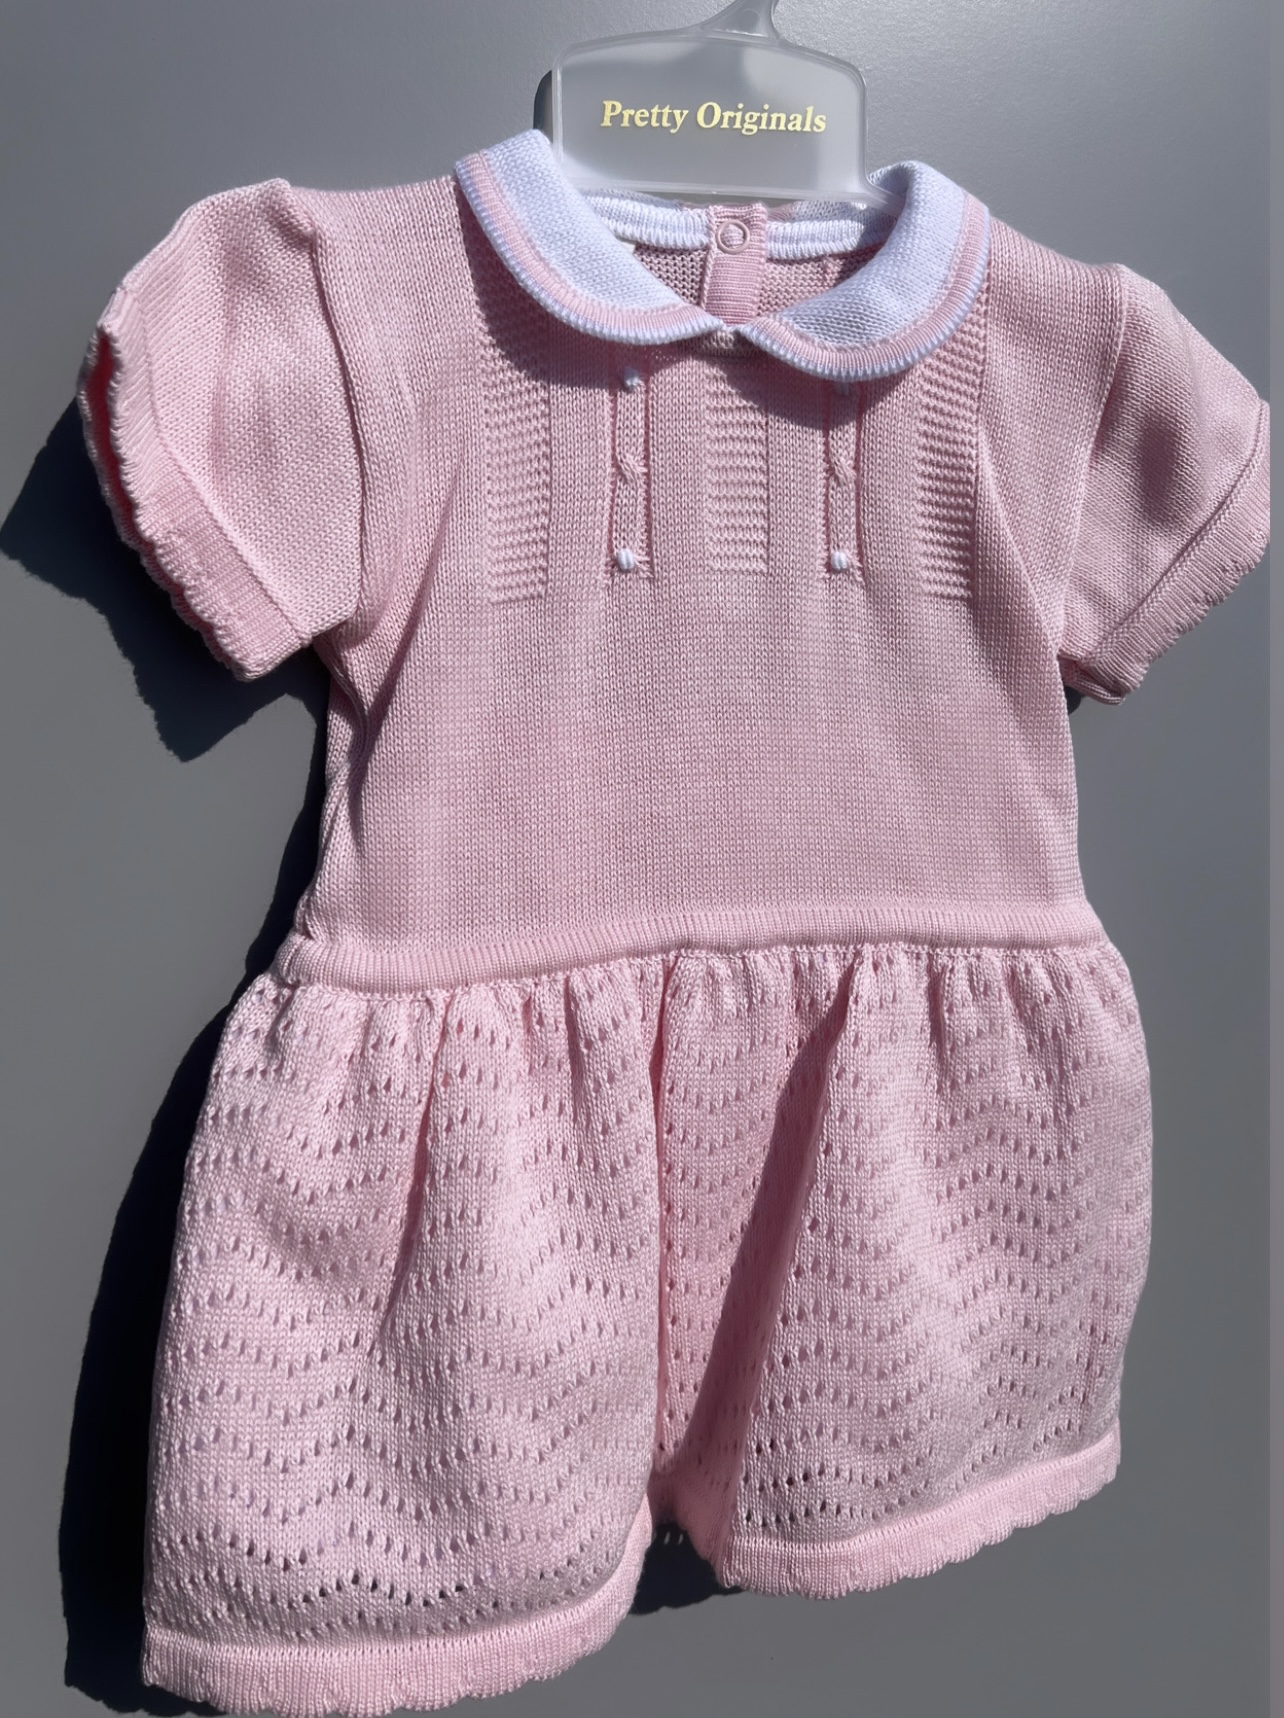 Pretty Originals Knit Dress Pink With White Collar